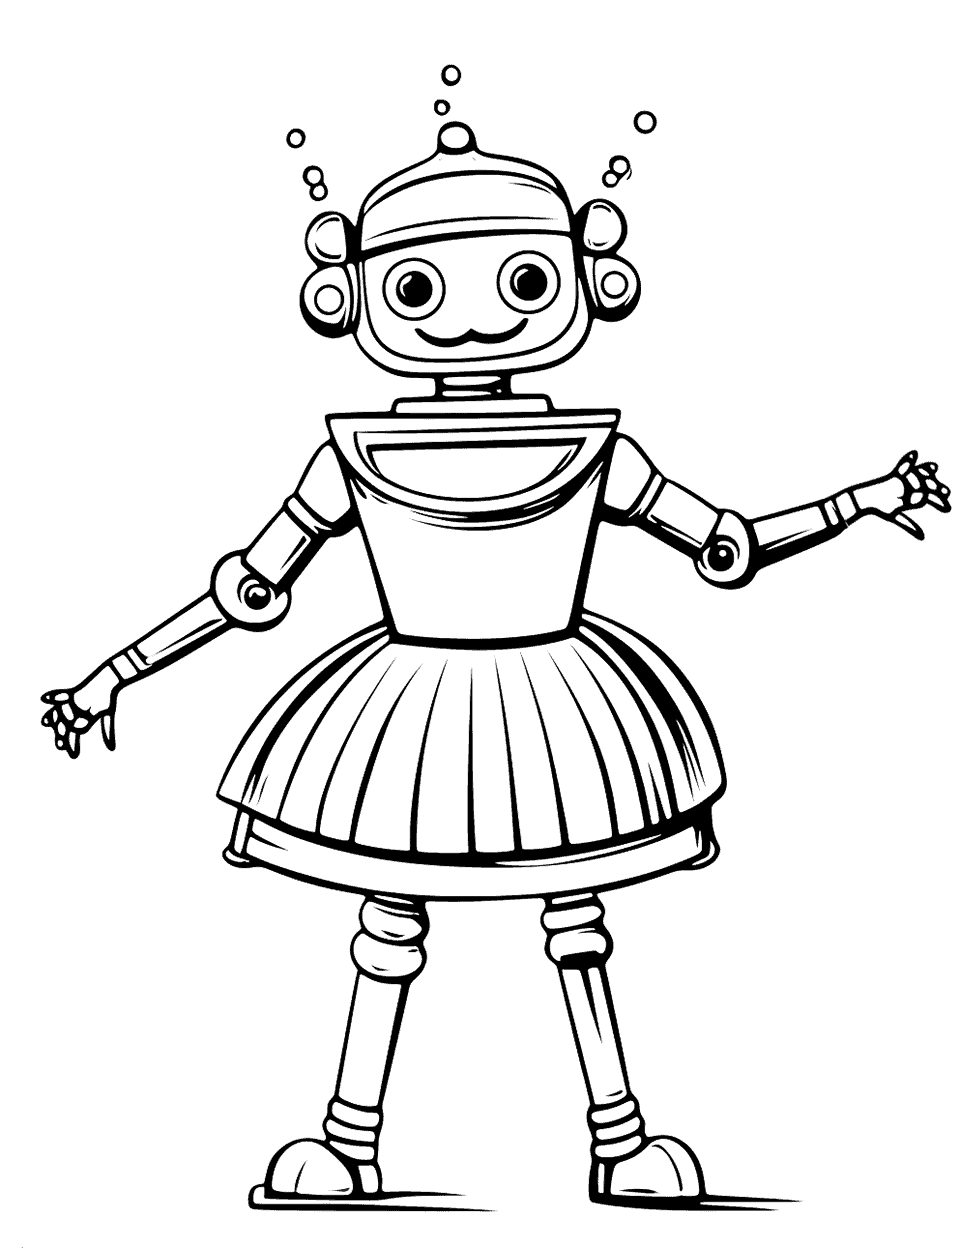 Ballet-Dancing Robot on Stage Coloring Page - A robot performing ballet in a tutu.